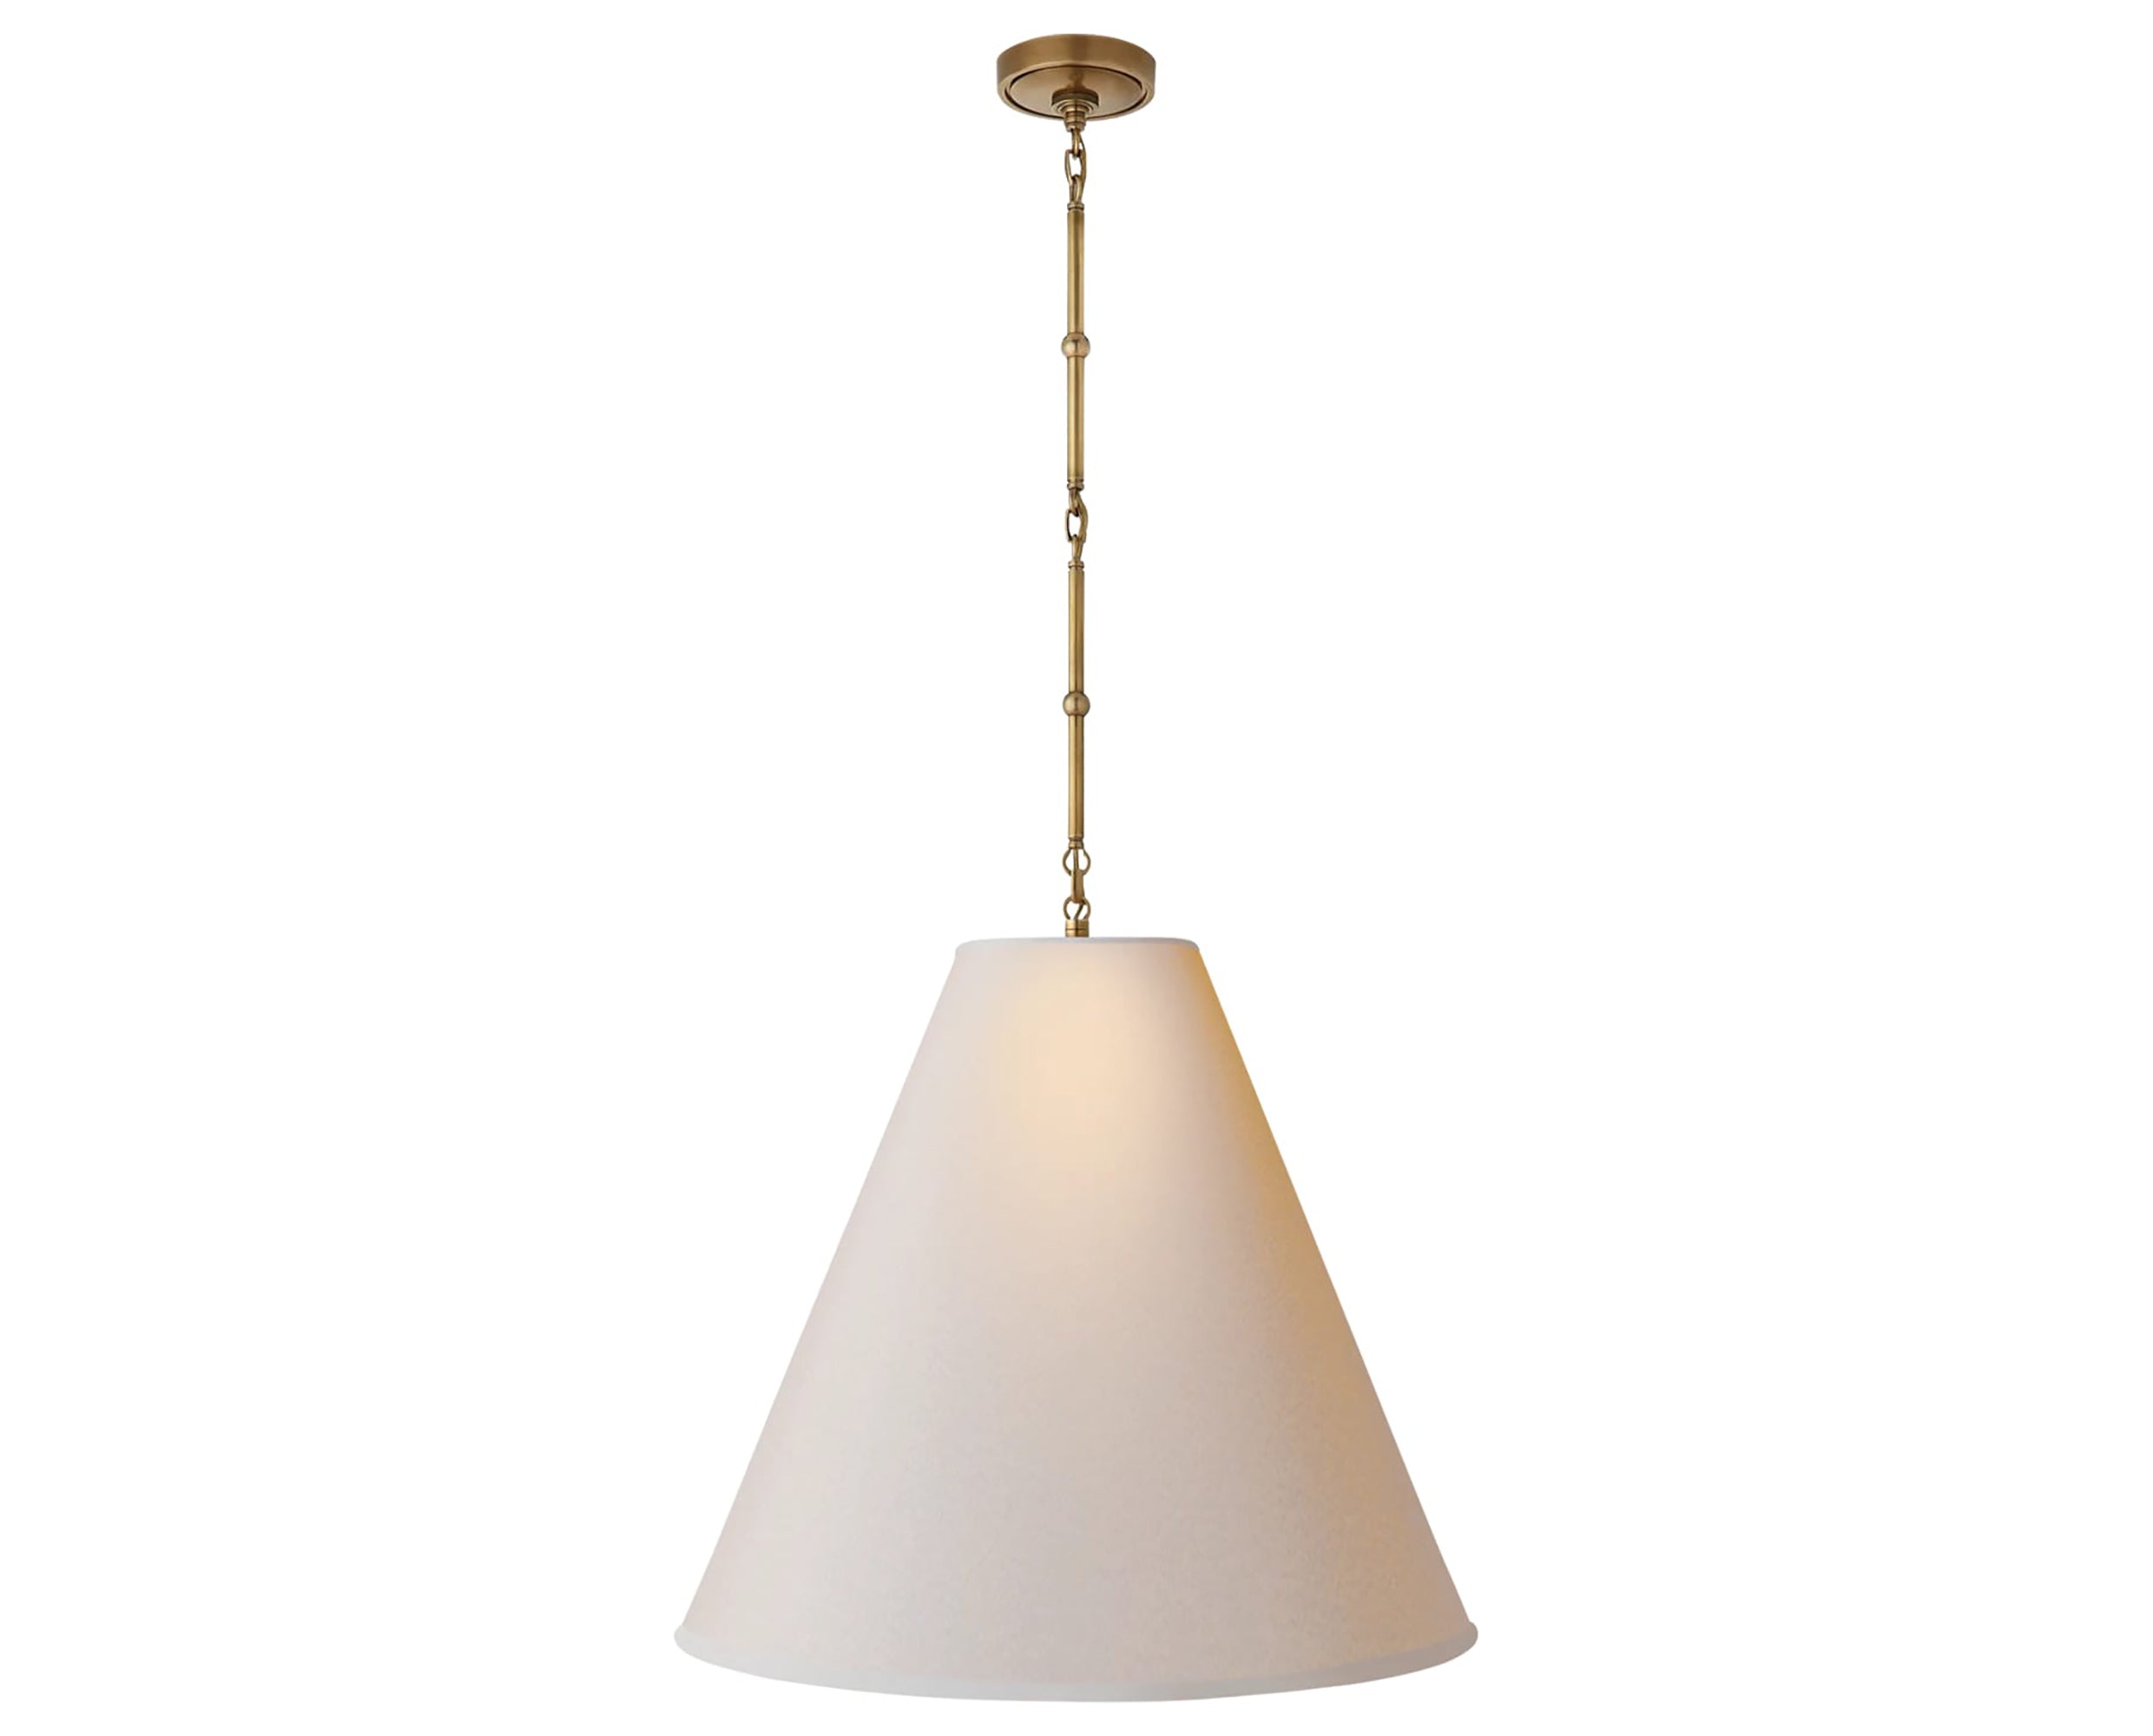 Hand-Rubbed Antique Brass and Natural Paper | Goodman Large Hanging Lamp | Valley Ridge Furniture